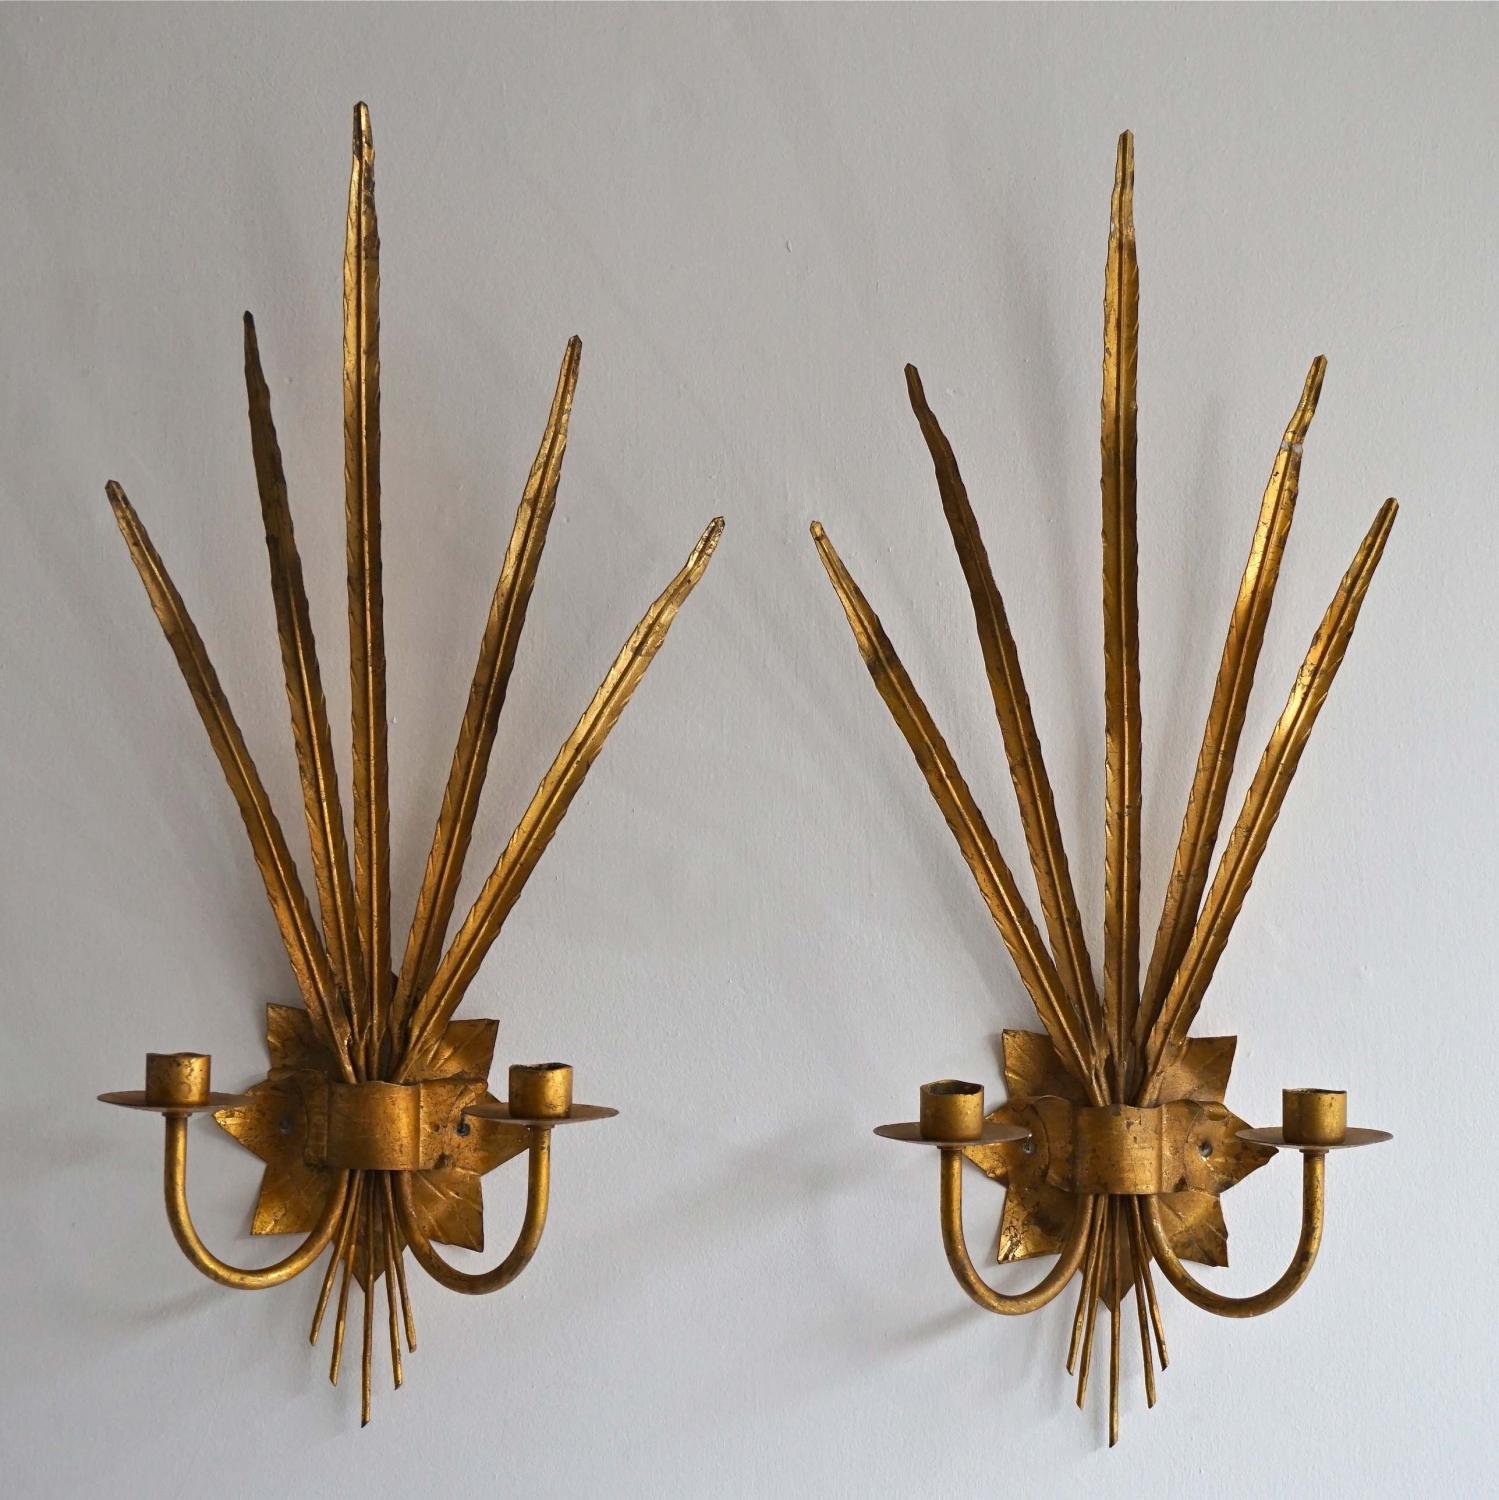 BEAUTIFUL PAIR OF GILDED METAL WALL SCONCES